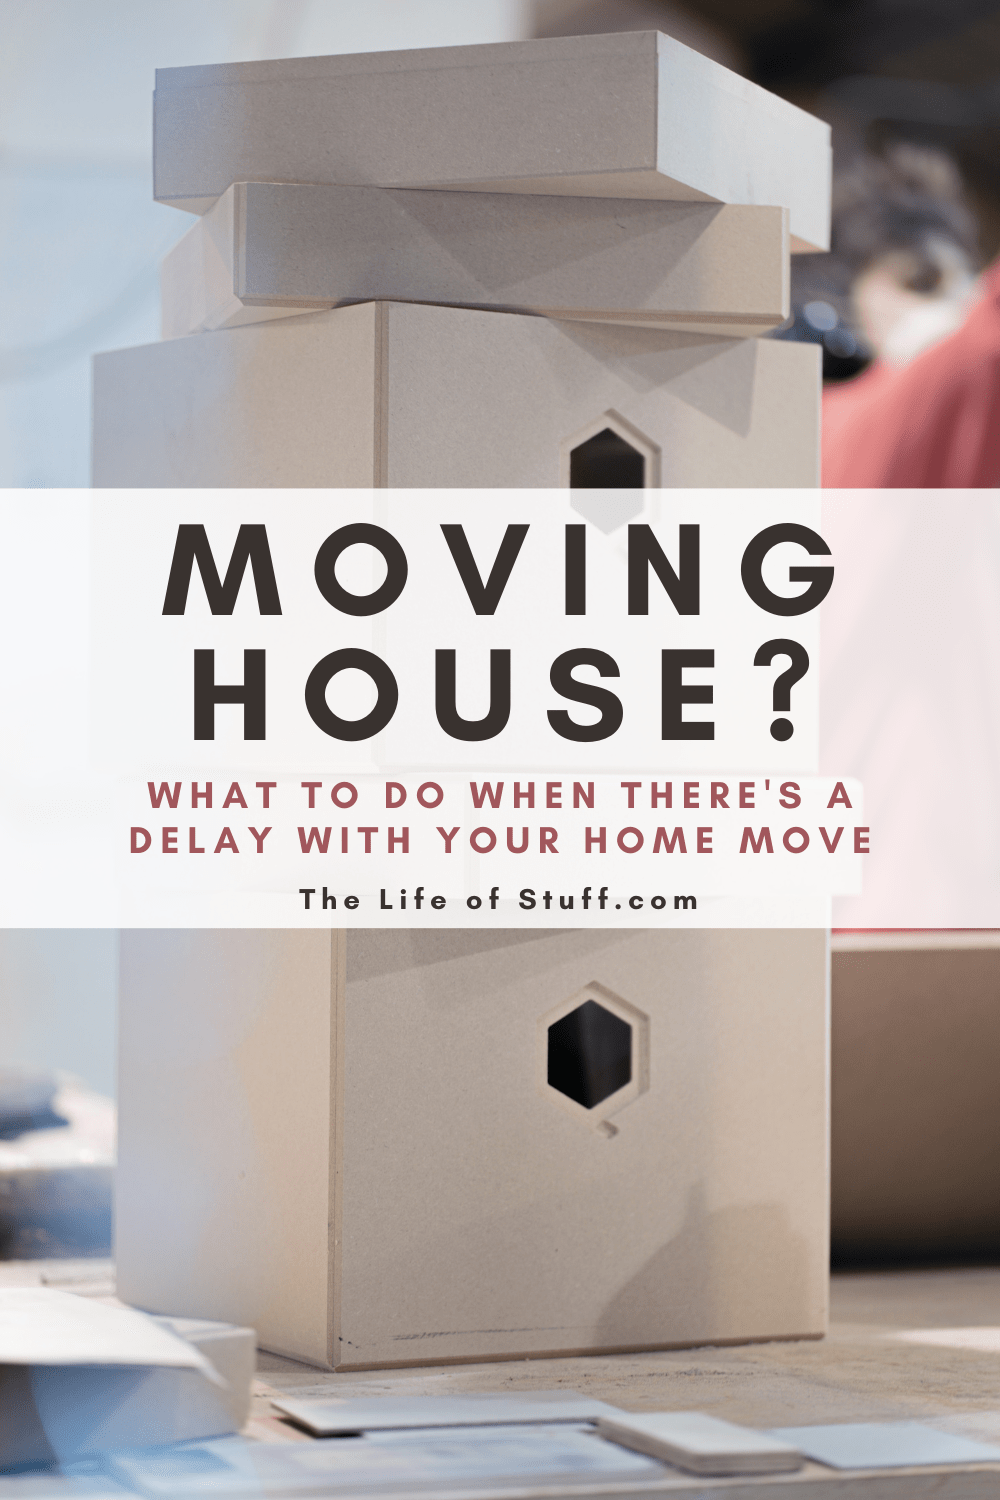 What to do When There's a Delay With Your Home Move - The Life of Stuff